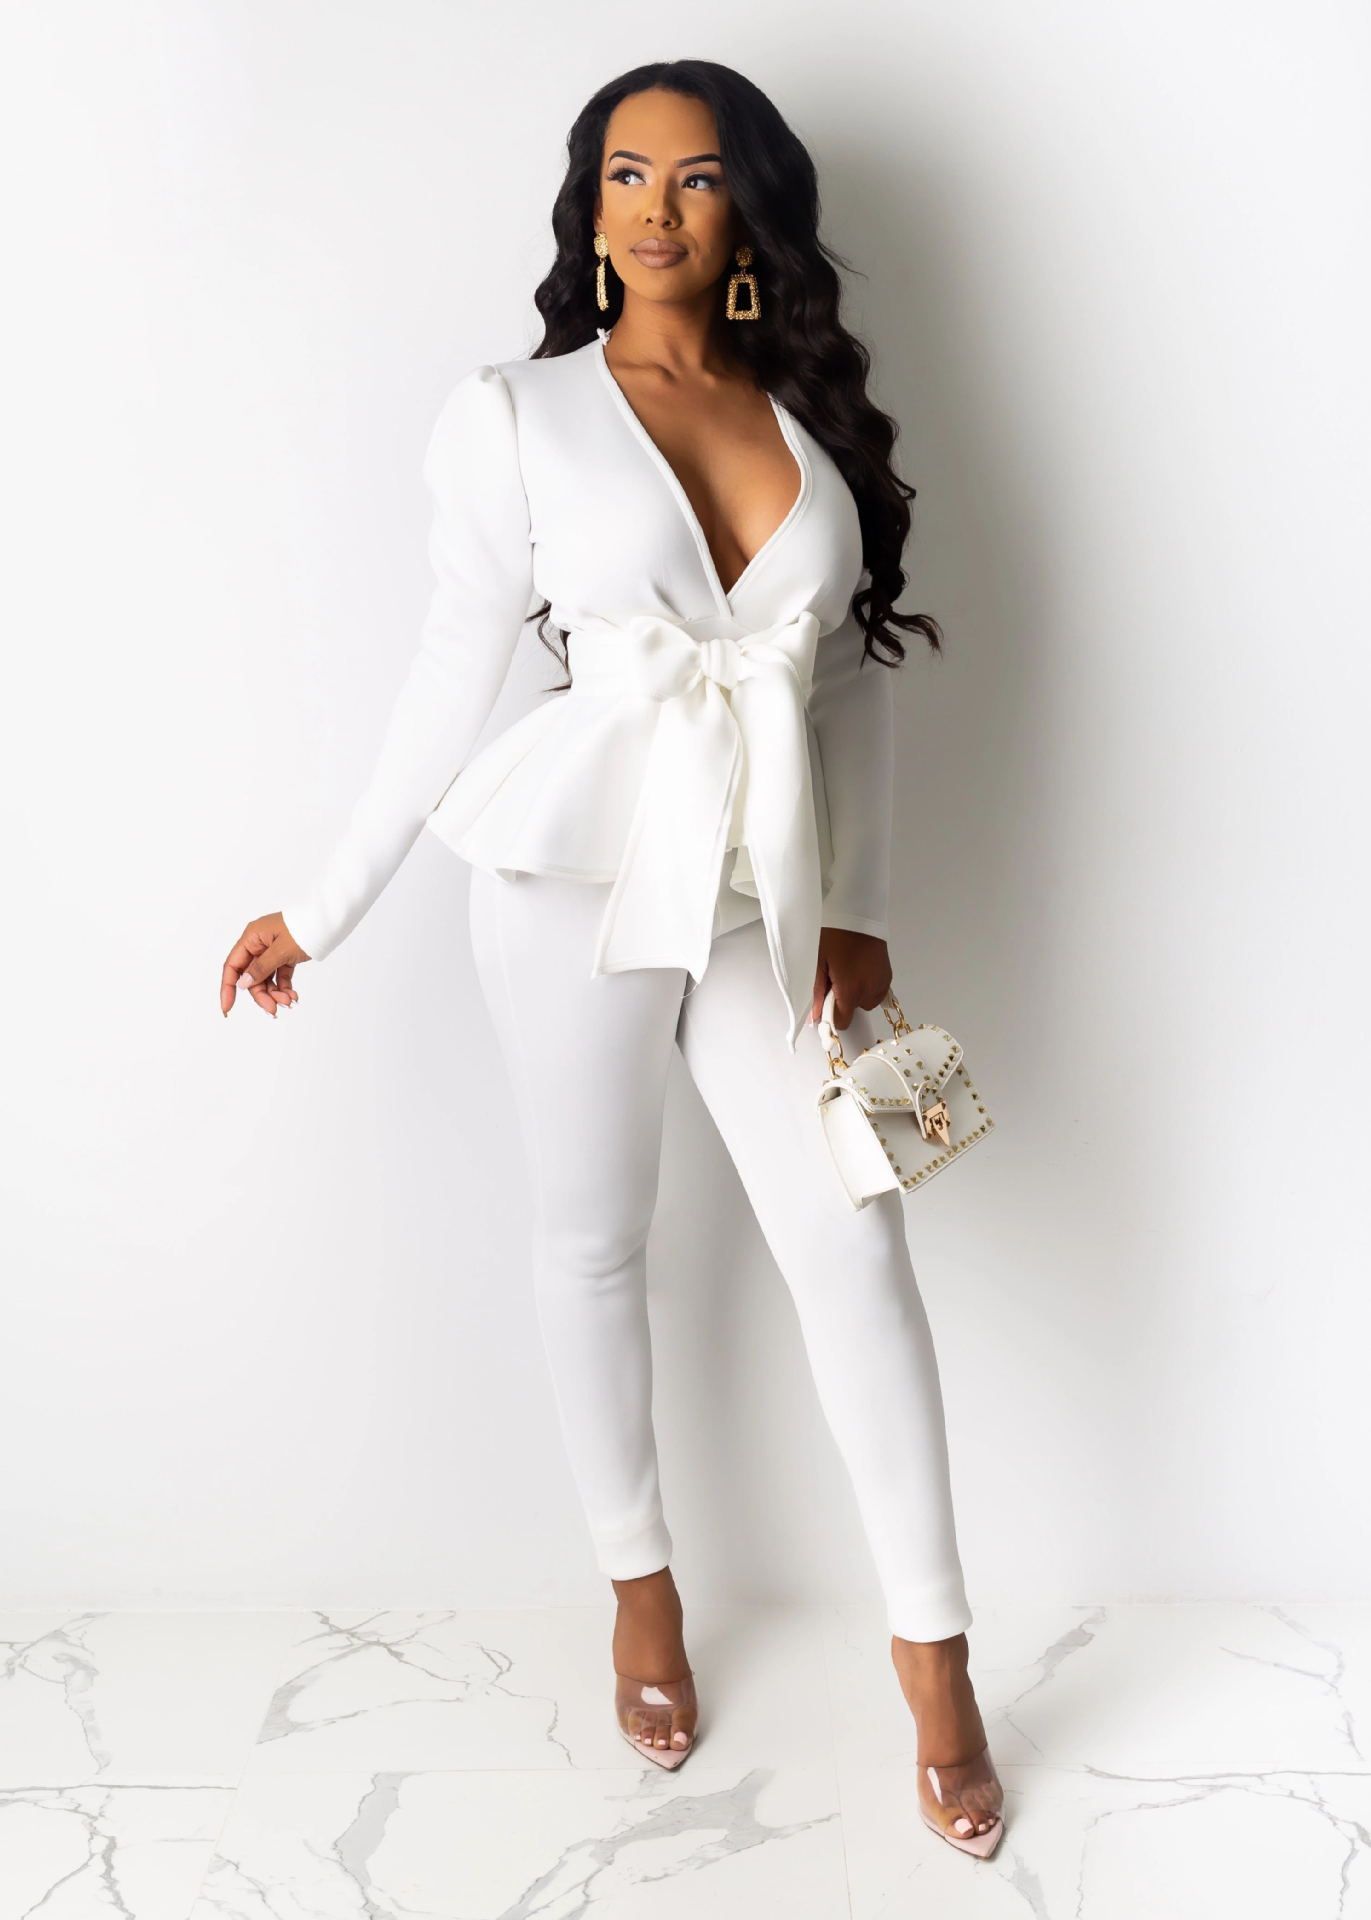 Tootless-Women Peplum V Neck Slim Fitted Blazer and Bodycon Dress Suit Sets